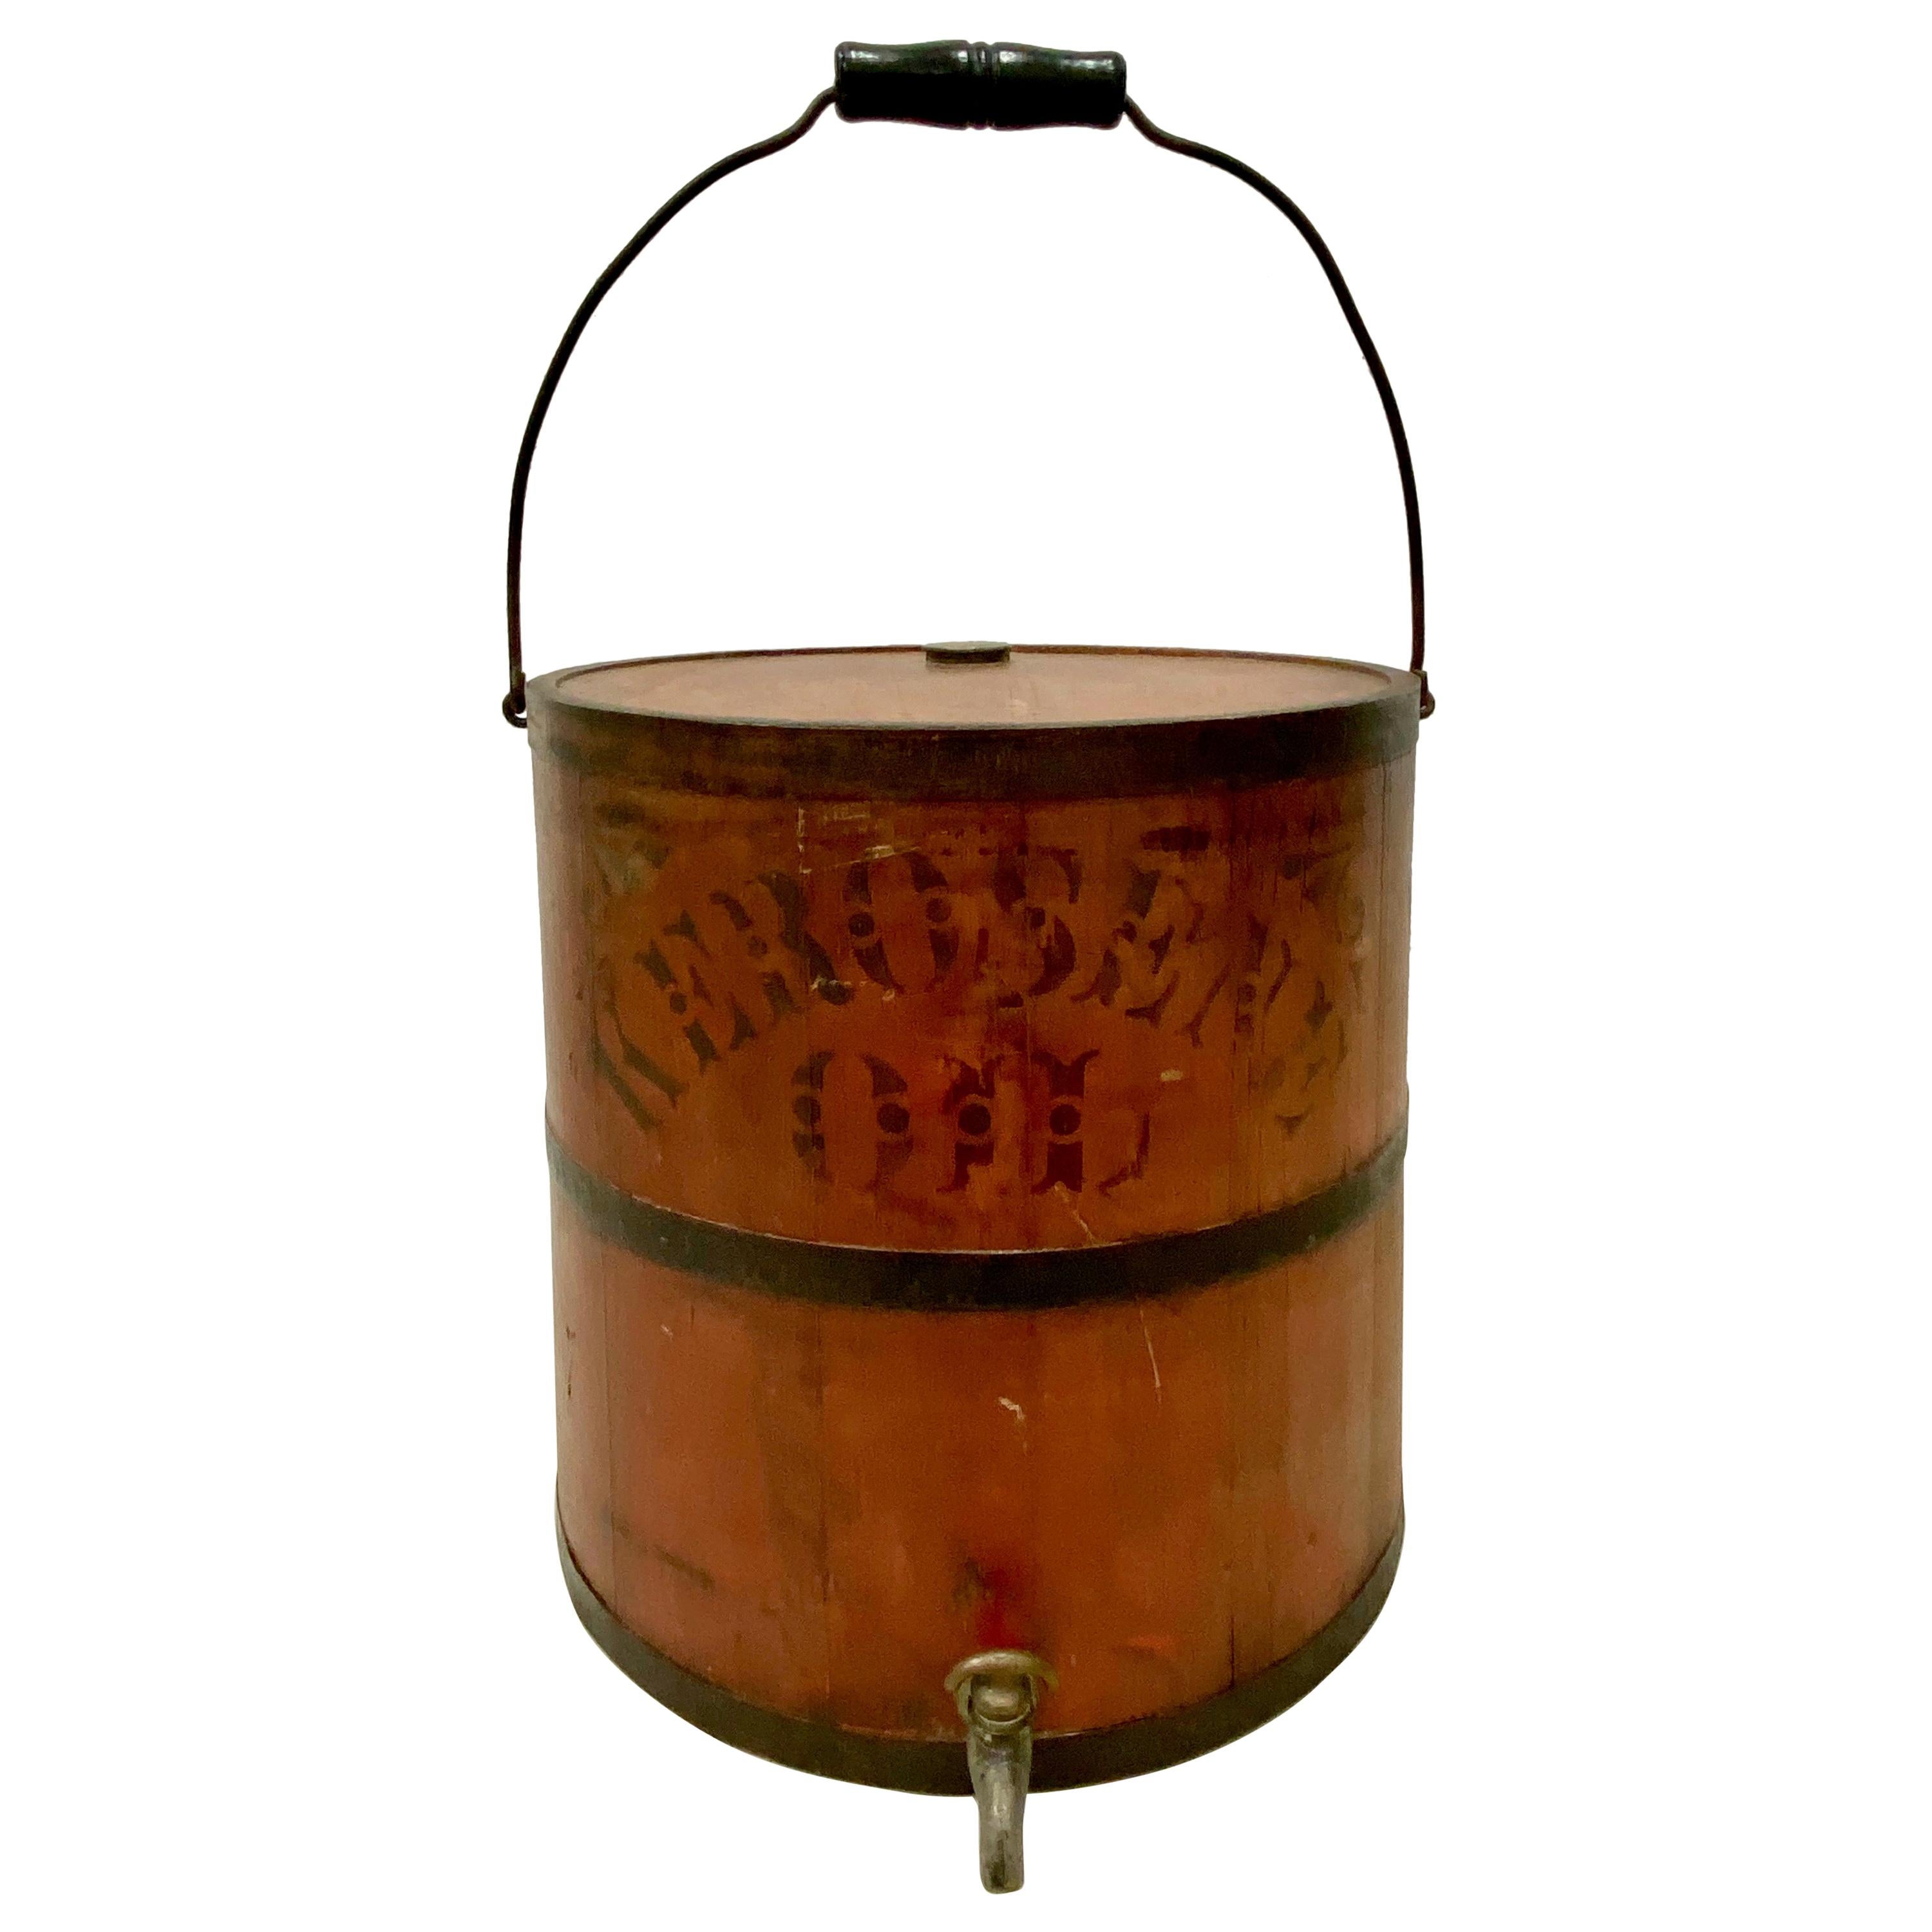 Early 20th Century "Impervious Safety Kerosene Can", circa 1915